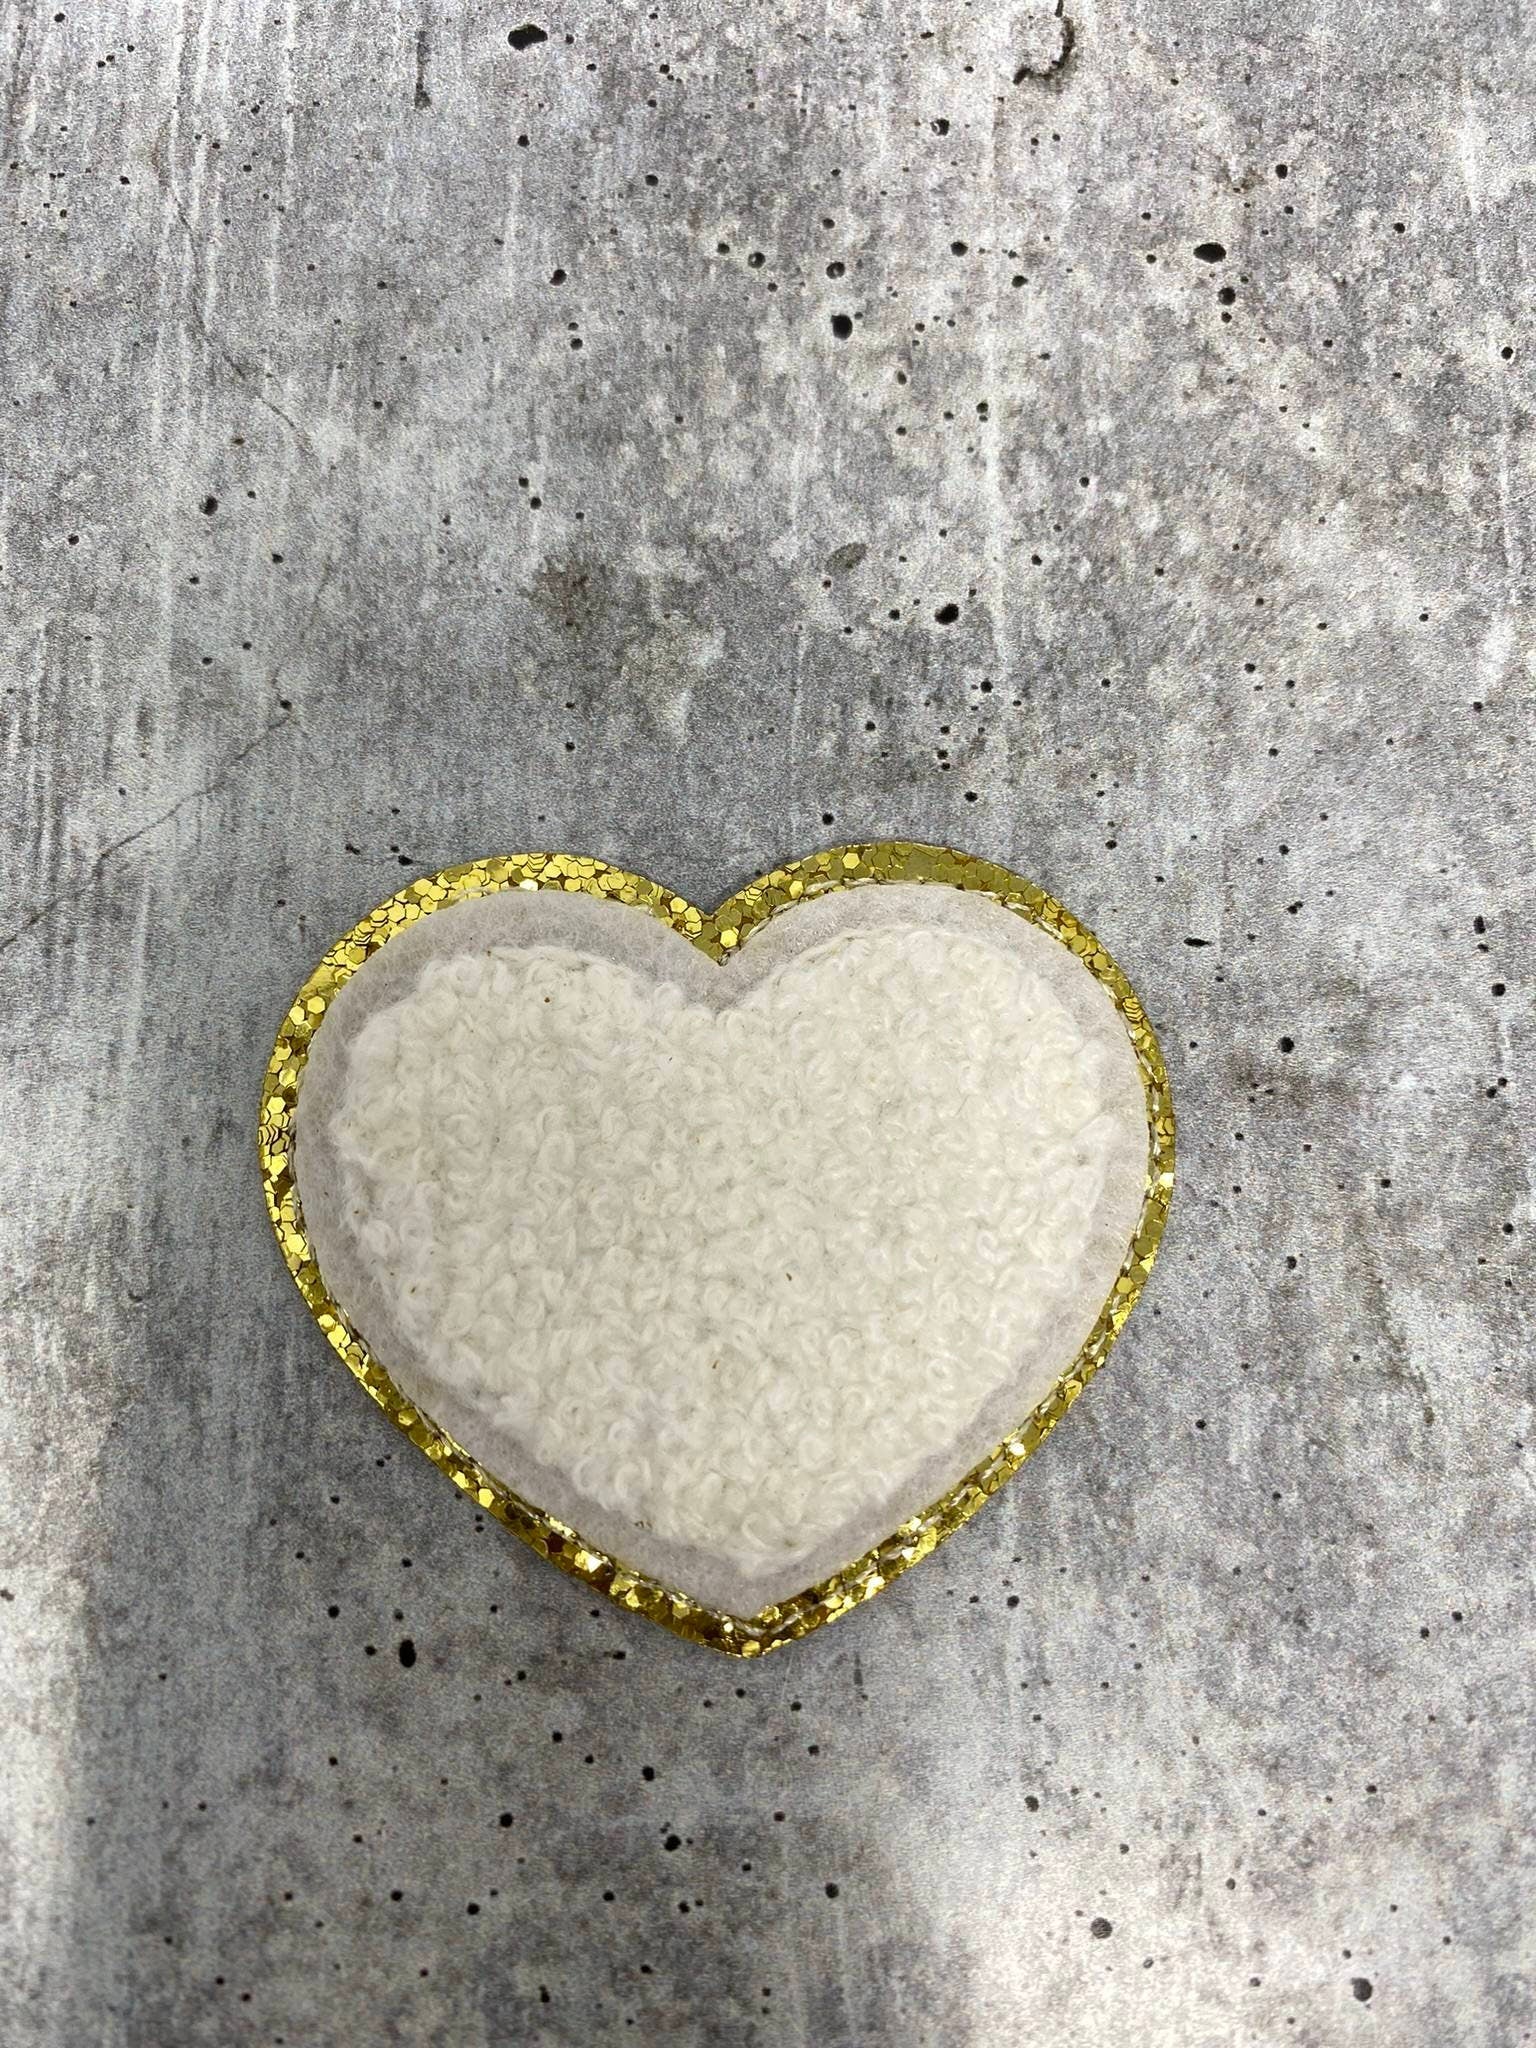 New: White, Chenille 1-pc "Heart Patch" w/ Gold Glitter, Size 2.5", Love Patch with Iron-on Backing, Fuzzy Applique, Iron-on Patch for Girls